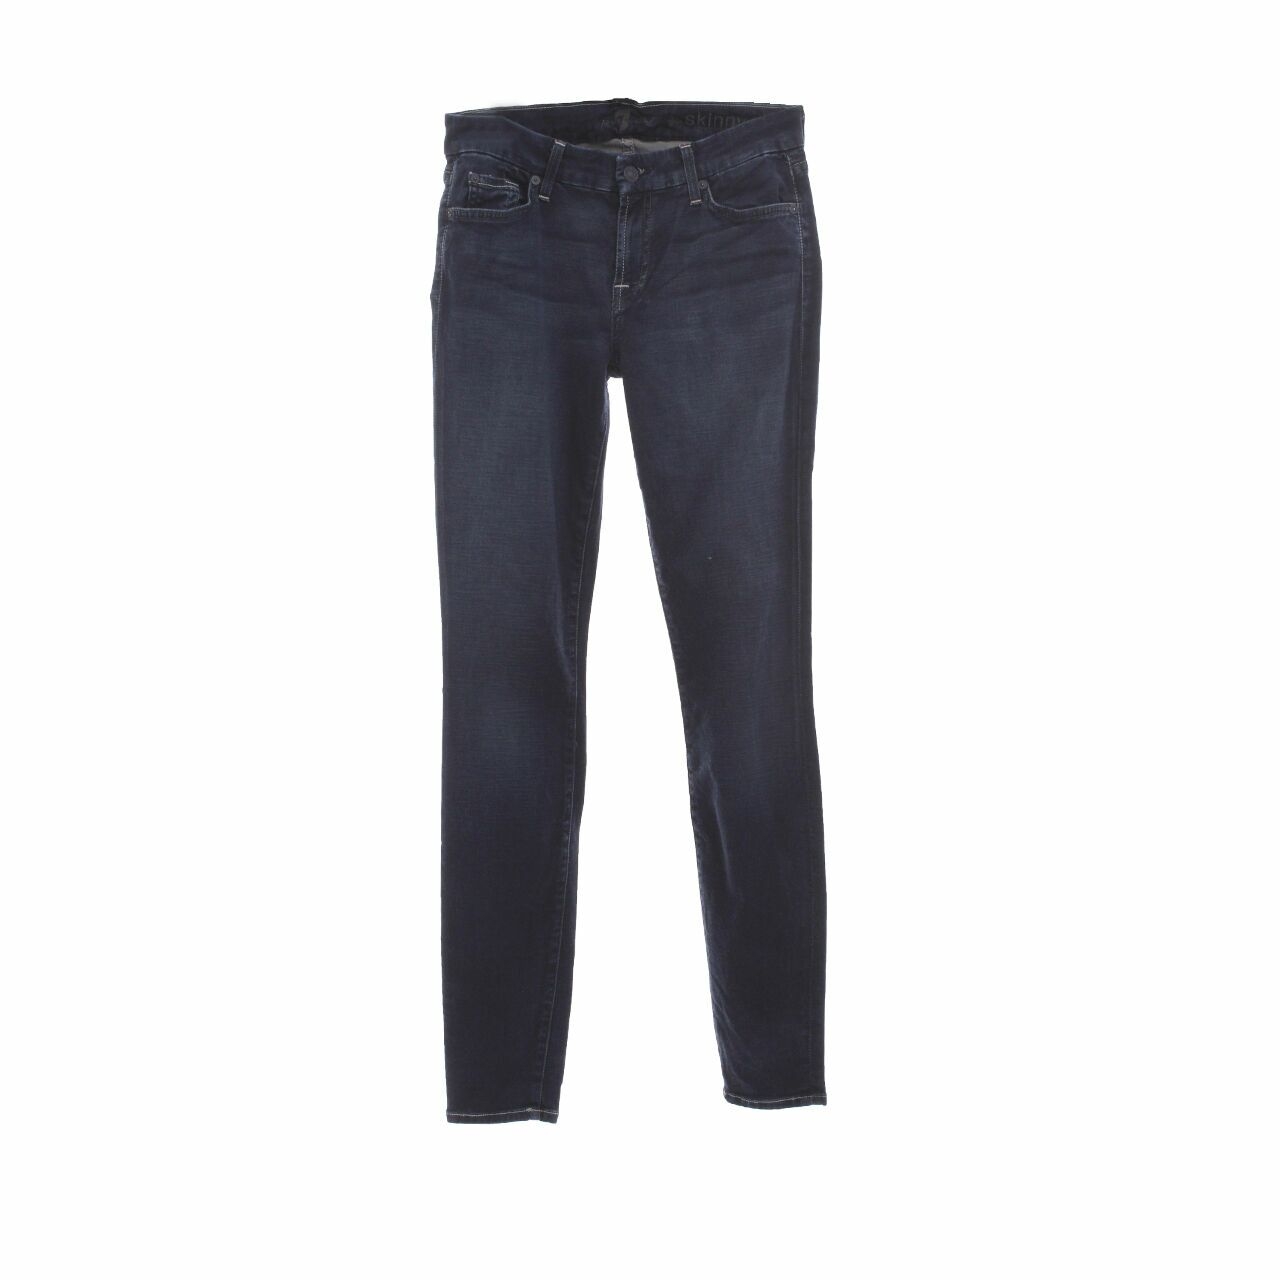 7 For All Mankind Dark Blue Long Pants